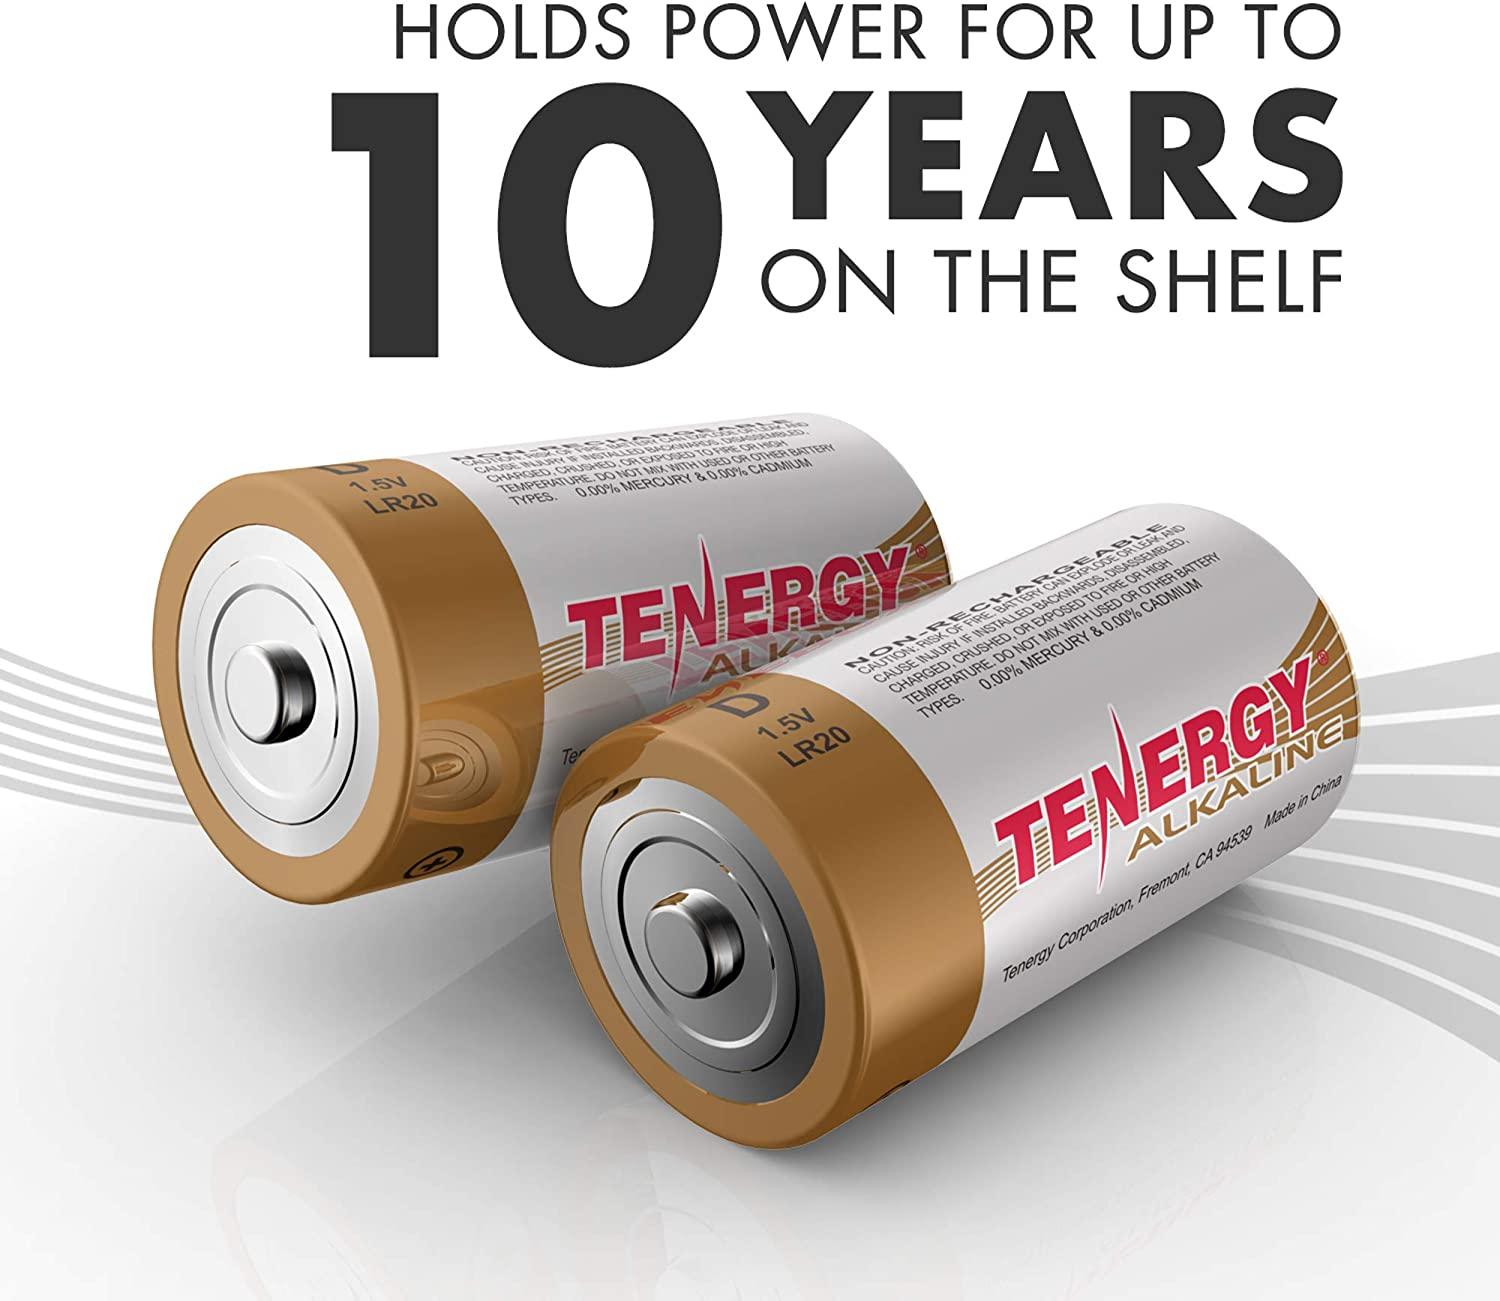 Tenergy 1.5VD Alkaline LR20 Battery, High Performance D Non-Rechargeable  Batteries for Clocks, Remotes, Toys & Electronic Devices, Replacement D  Cell